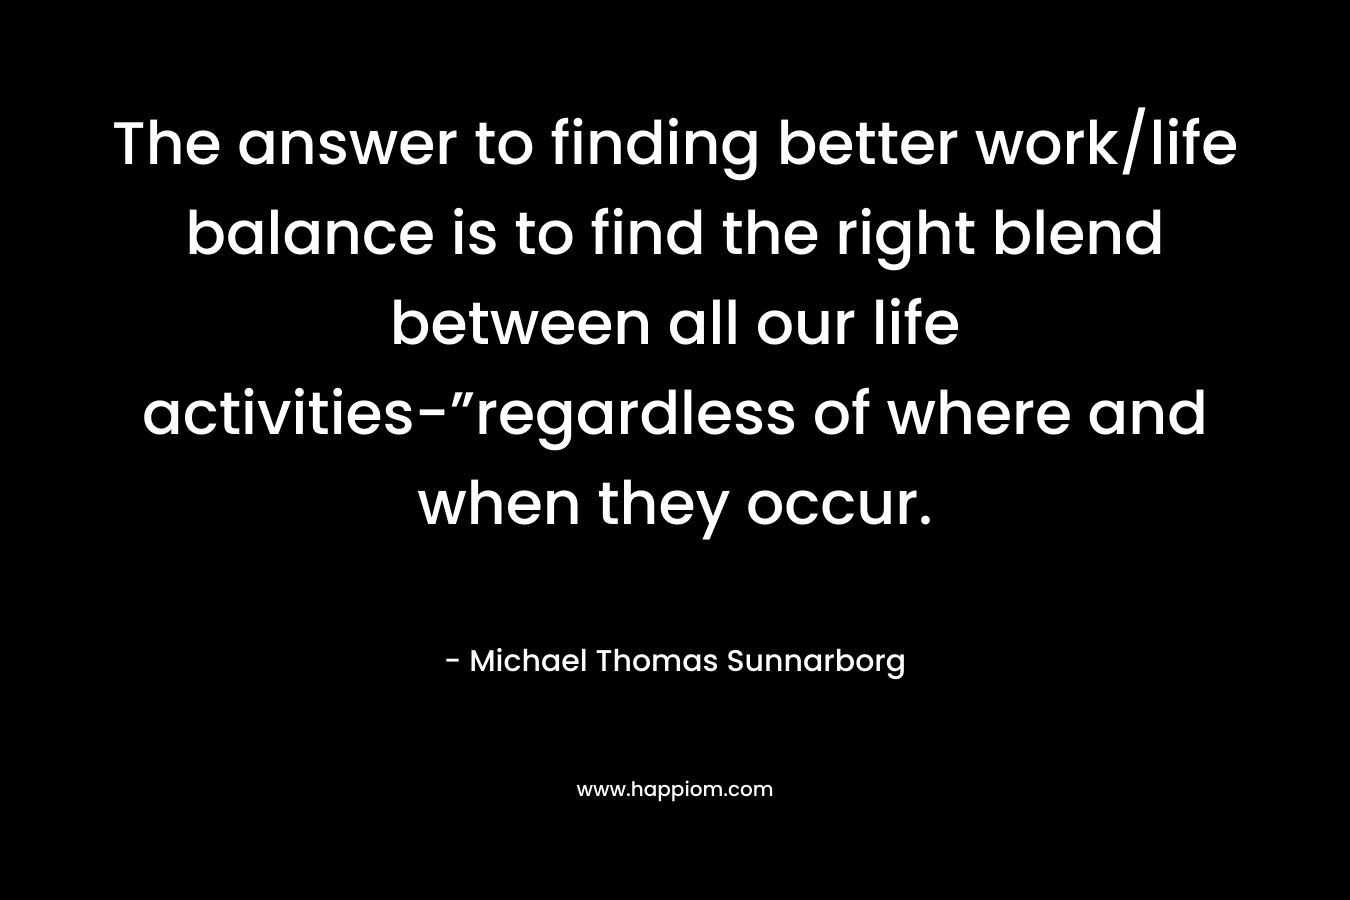 The answer to finding better work/life balance is to find the right blend between all our life activities-”regardless of where and when they occur. – Michael Thomas Sunnarborg